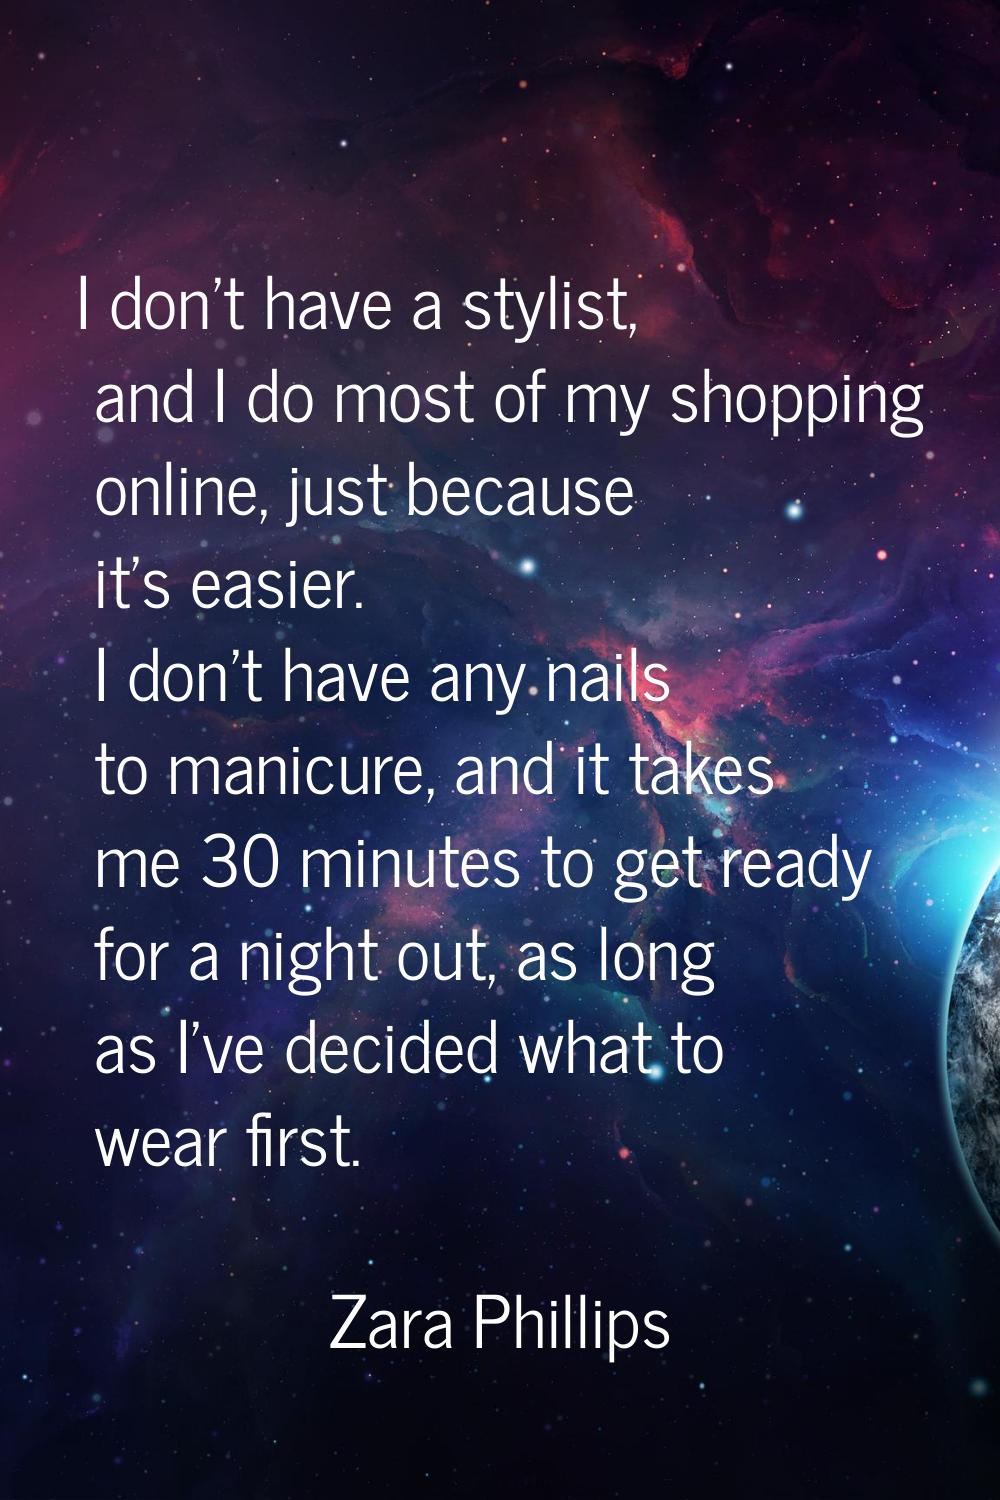 I don't have a stylist, and I do most of my shopping online, just because it's easier. I don't have